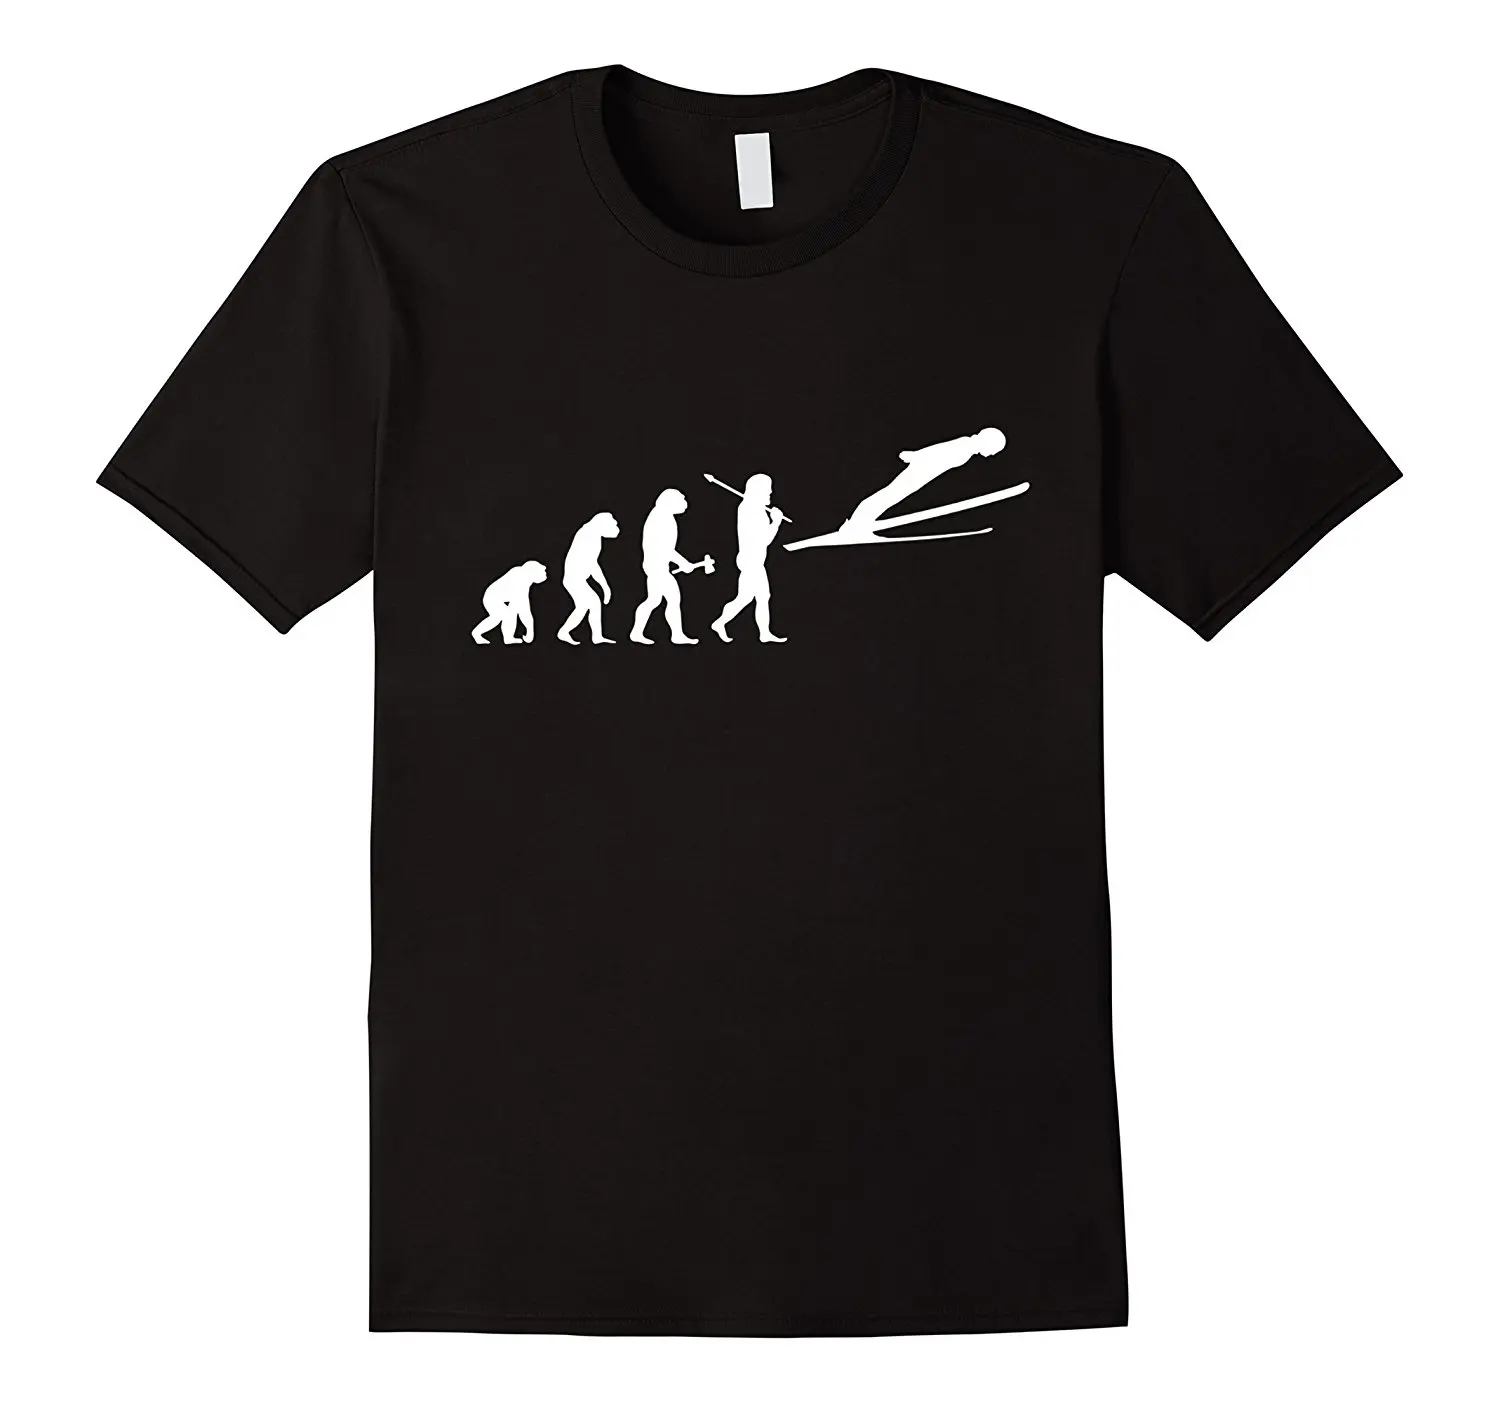 

Skies Jumping Jumper Evolution Funny T-Shirt Fashion T-Shirts Slim Fit O-Neck Top Tee Printed Pure Cotton Men'S Dress